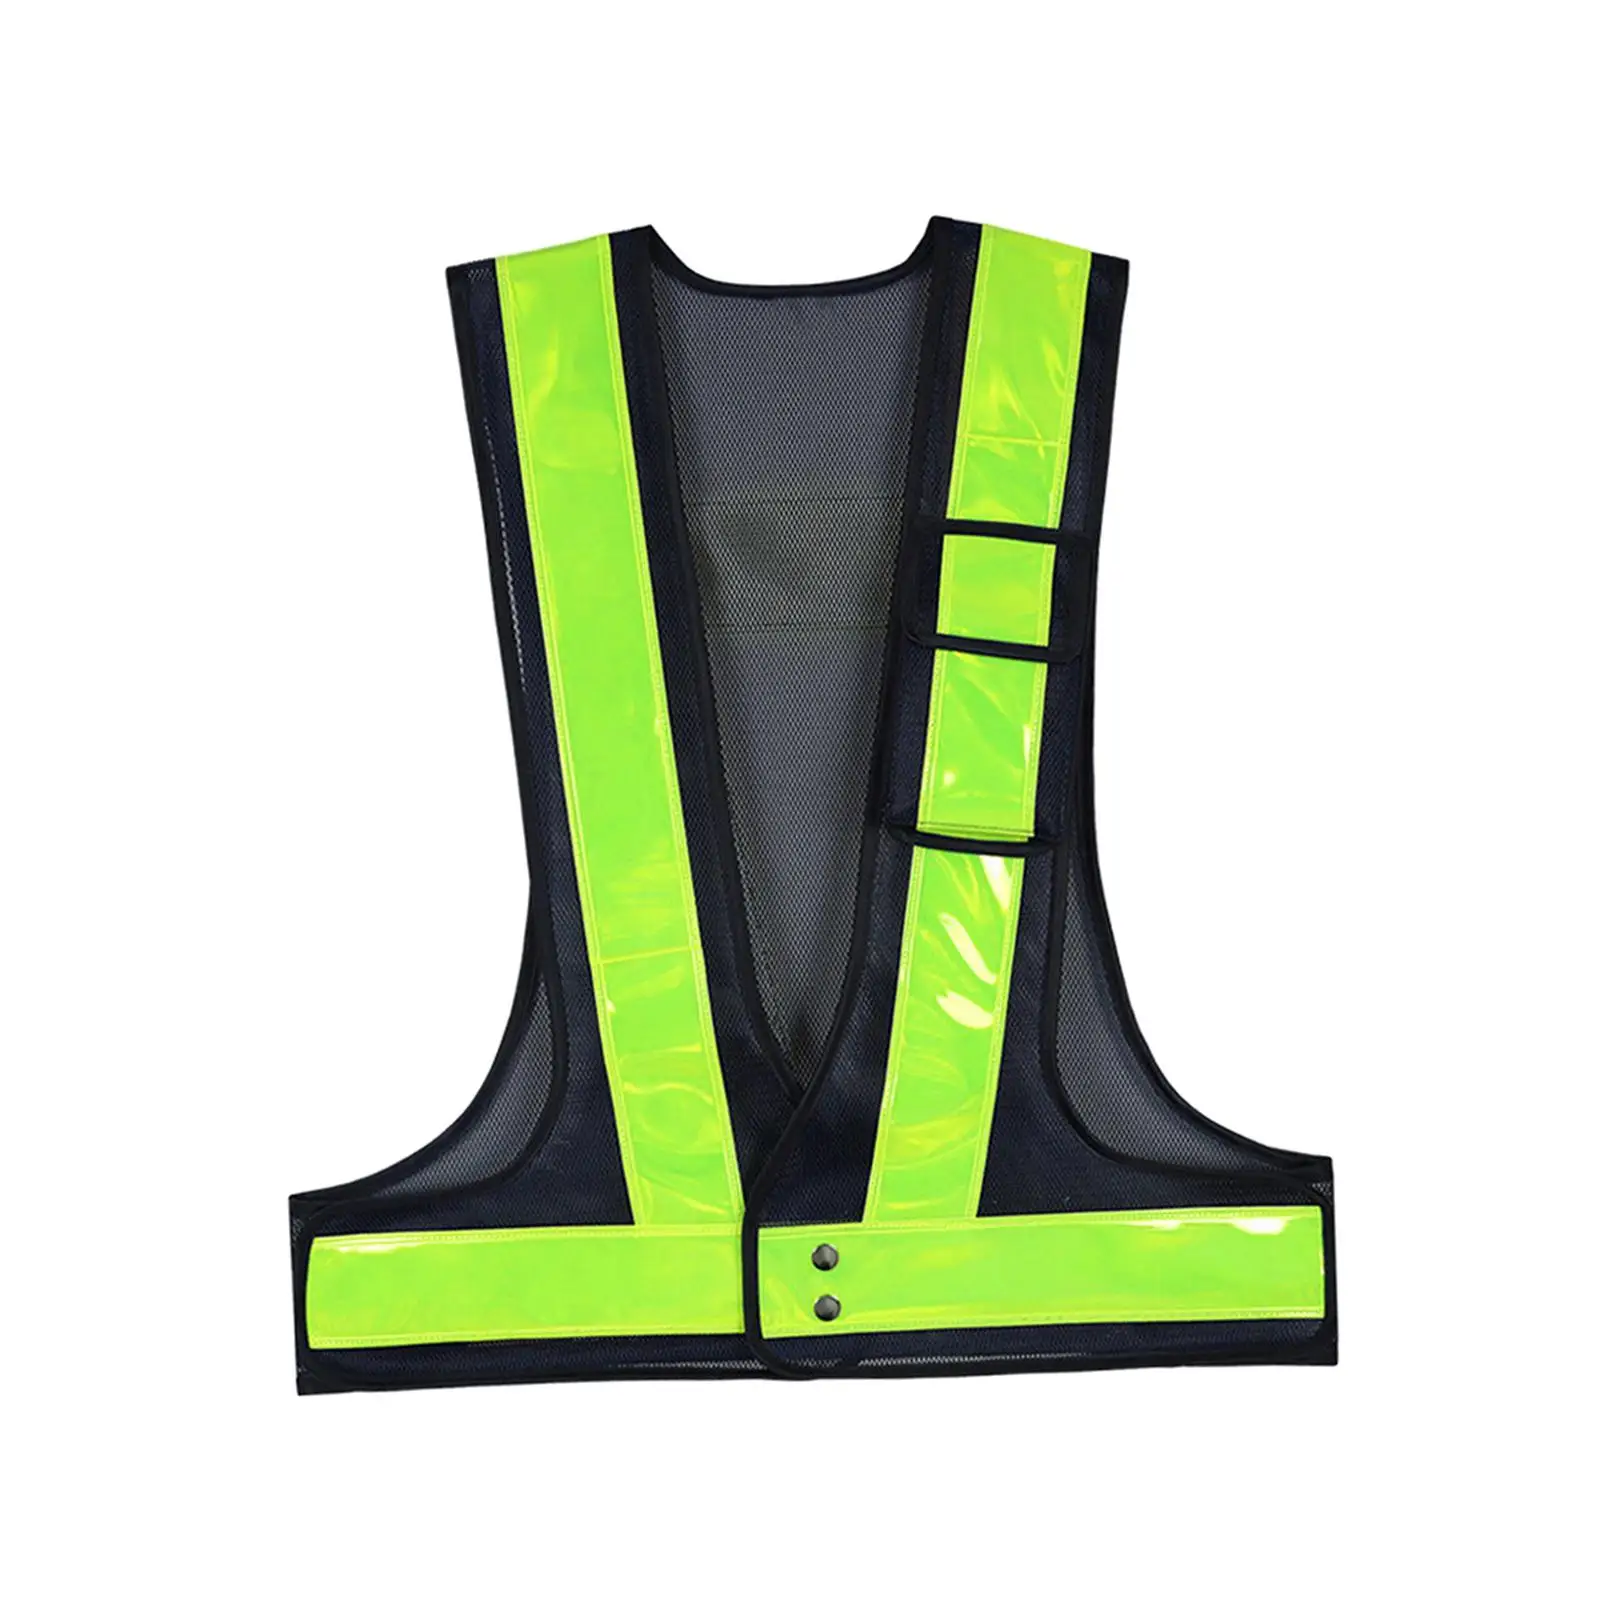 High Visible Reflective Safety Vest Breathable with Pocket Running Reflective Vest Gear for Walking Road Jogging Worker Cycling